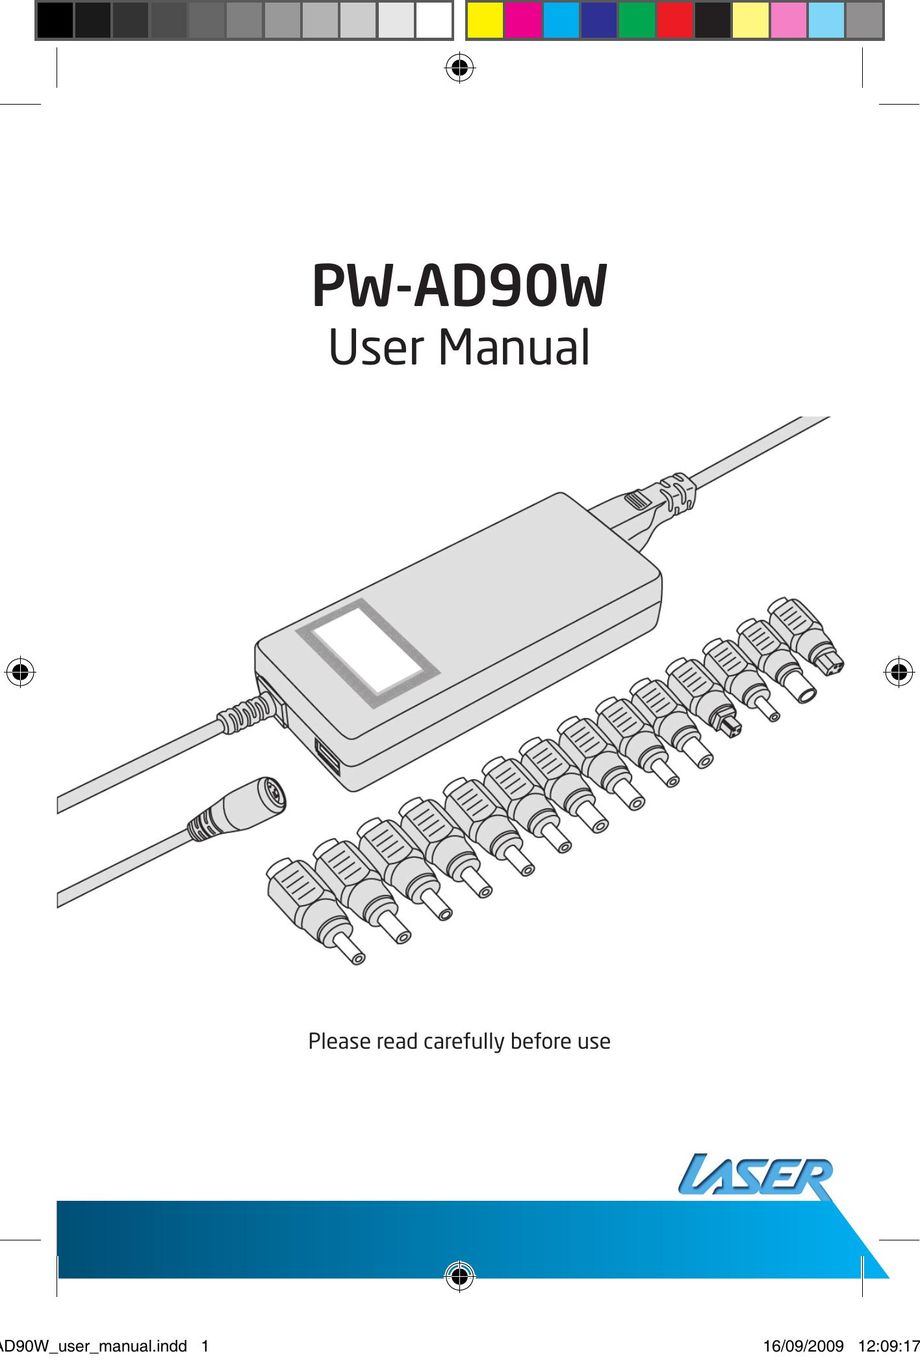 Laser PW-AD90W Computer Accessories User Manual